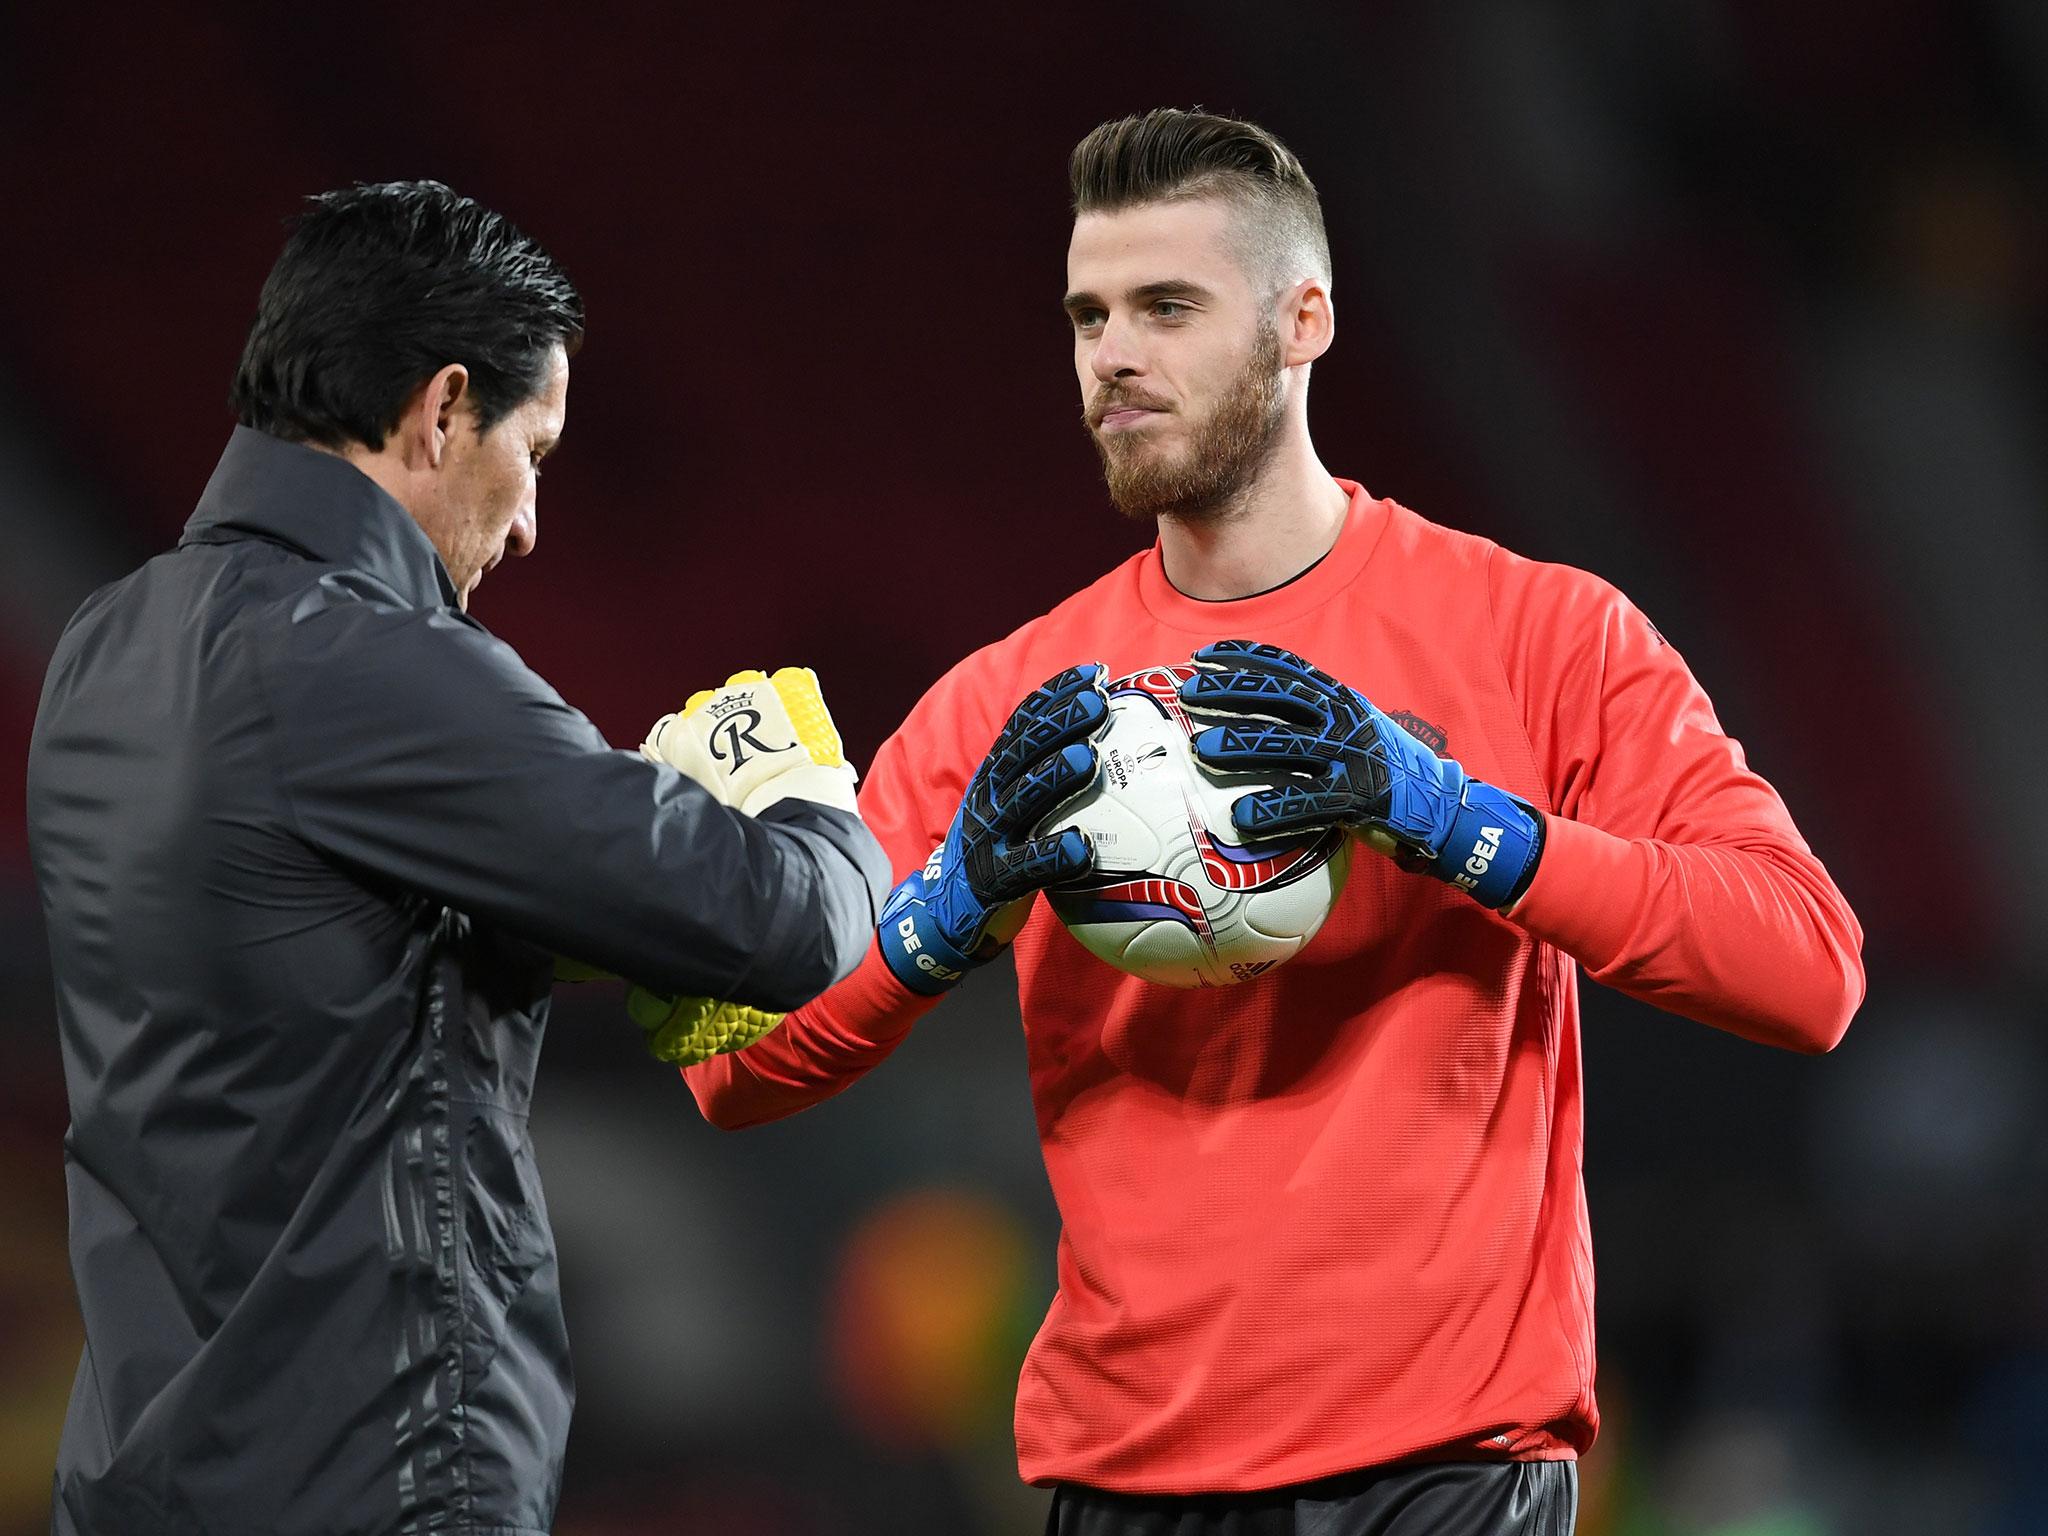 David De Gea could leave Manchester United in the summer if Real Madrid meet their valuation